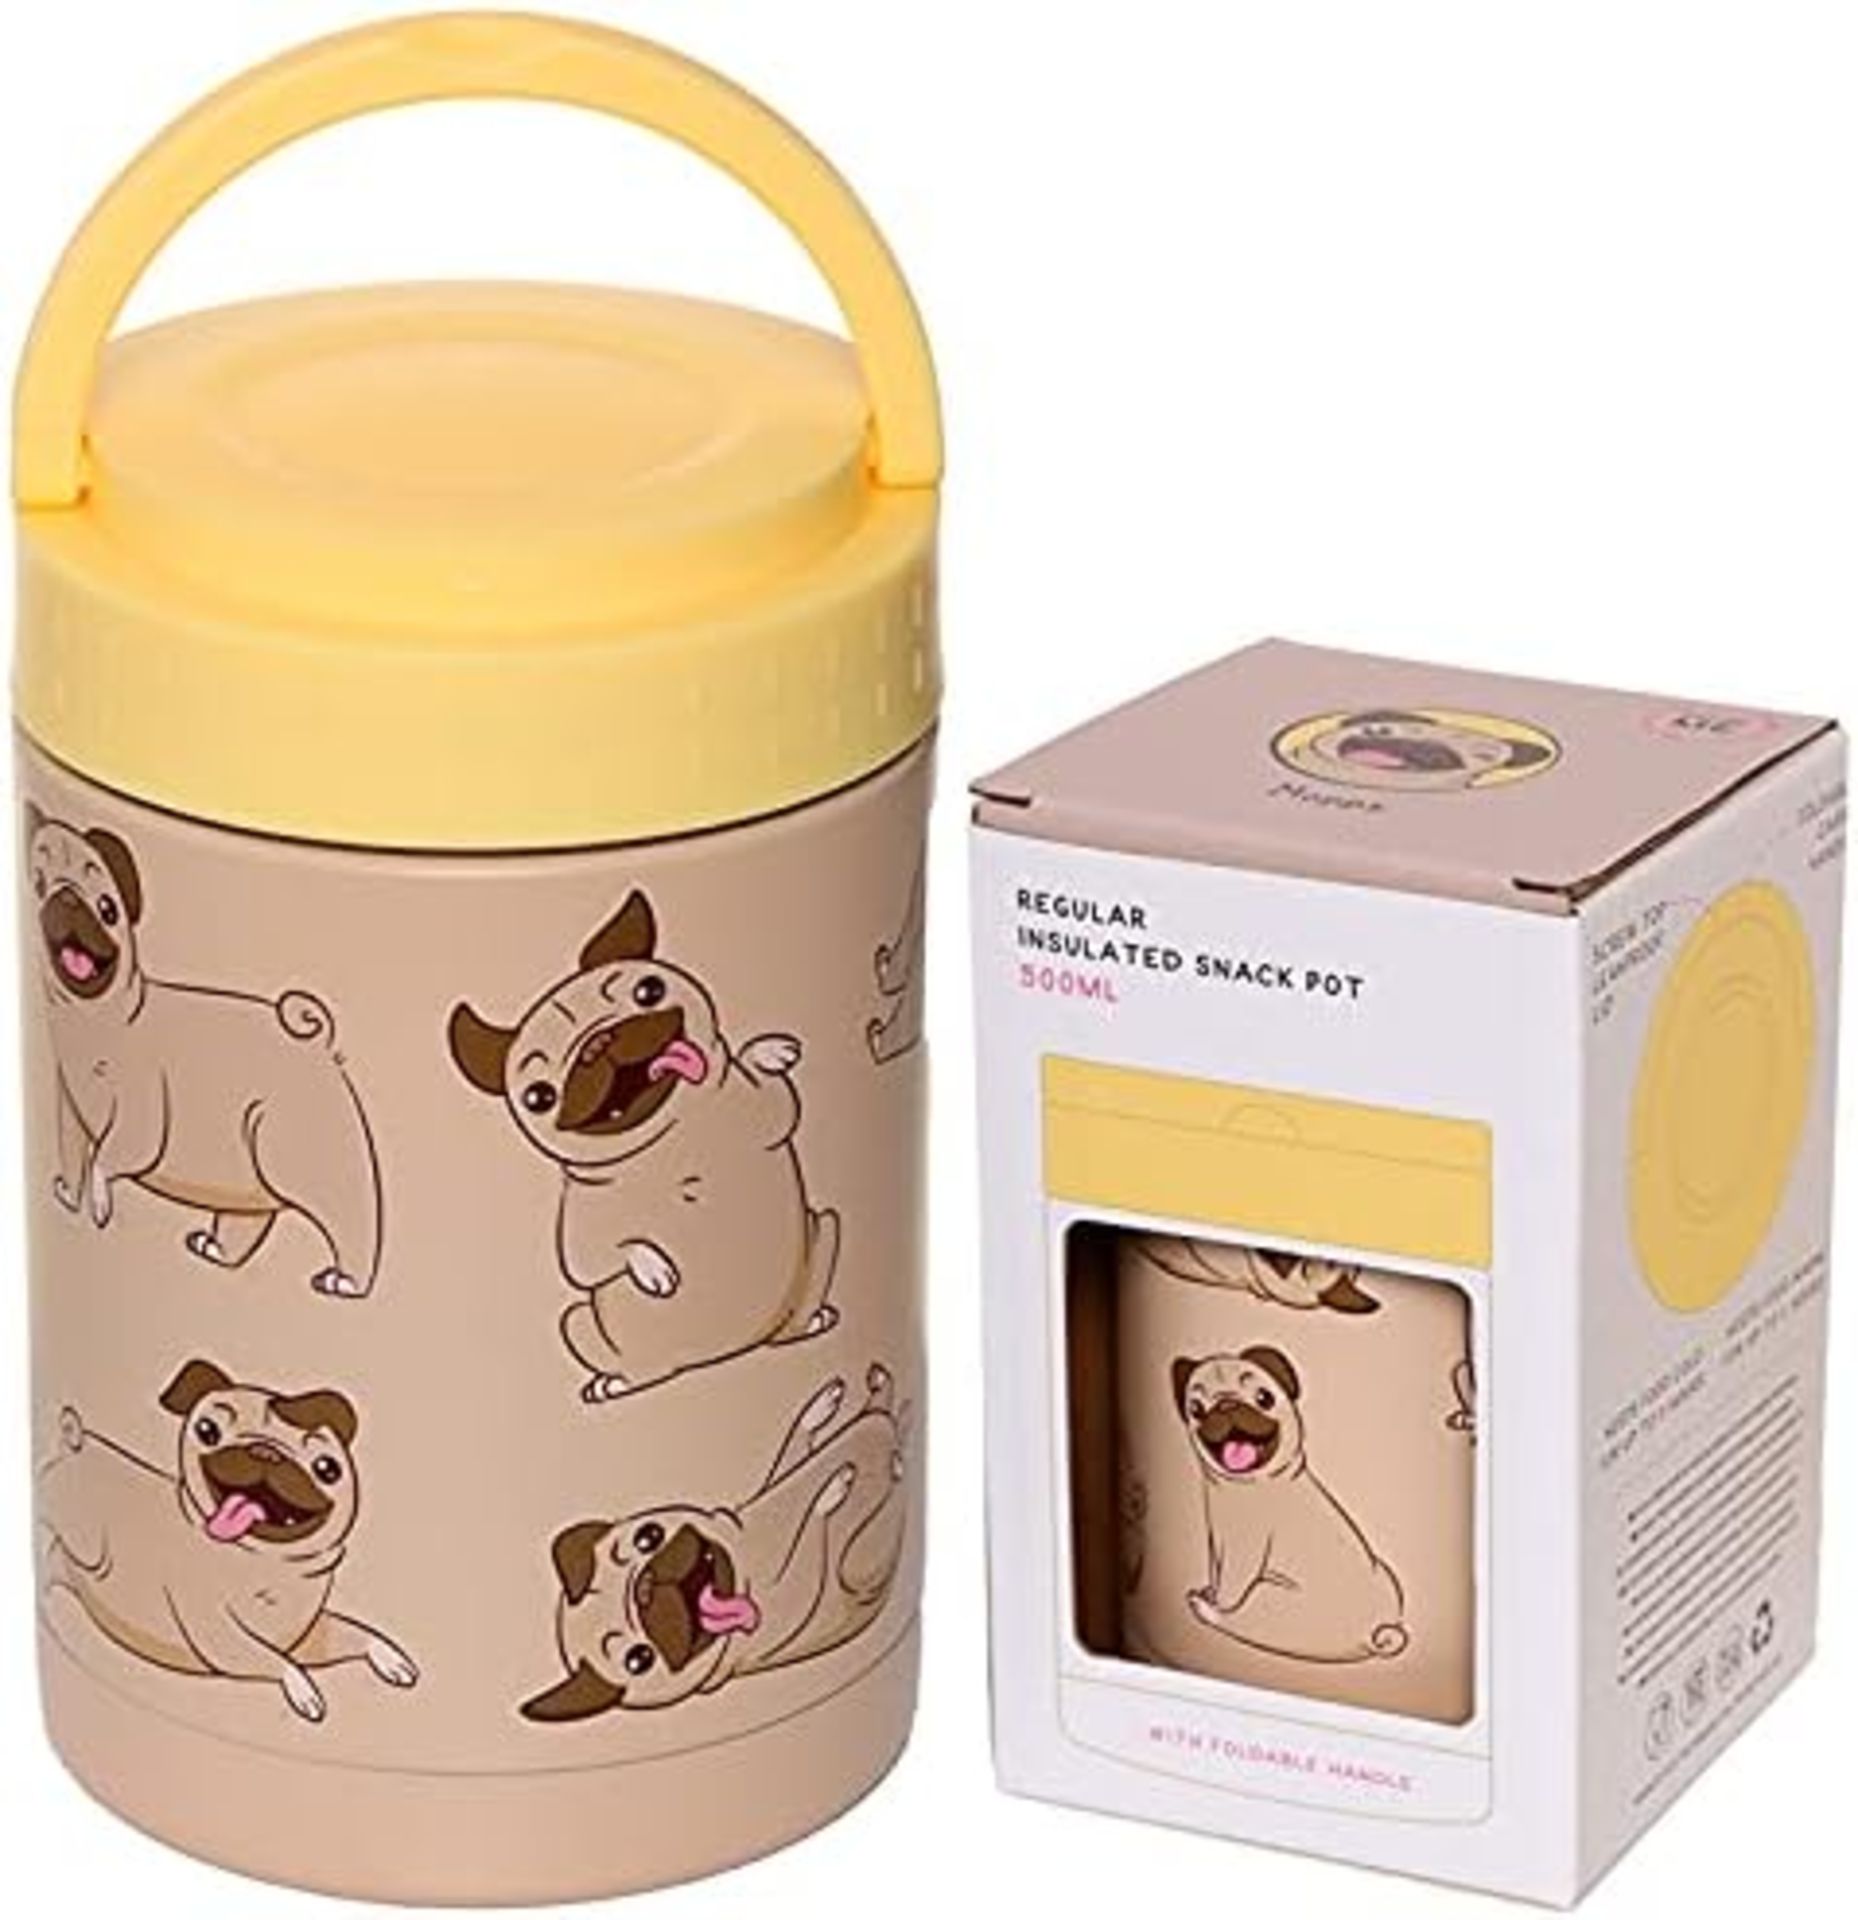 16 X NEW PUG HOT & COLD LUNCH POT 500ML - Image 4 of 4